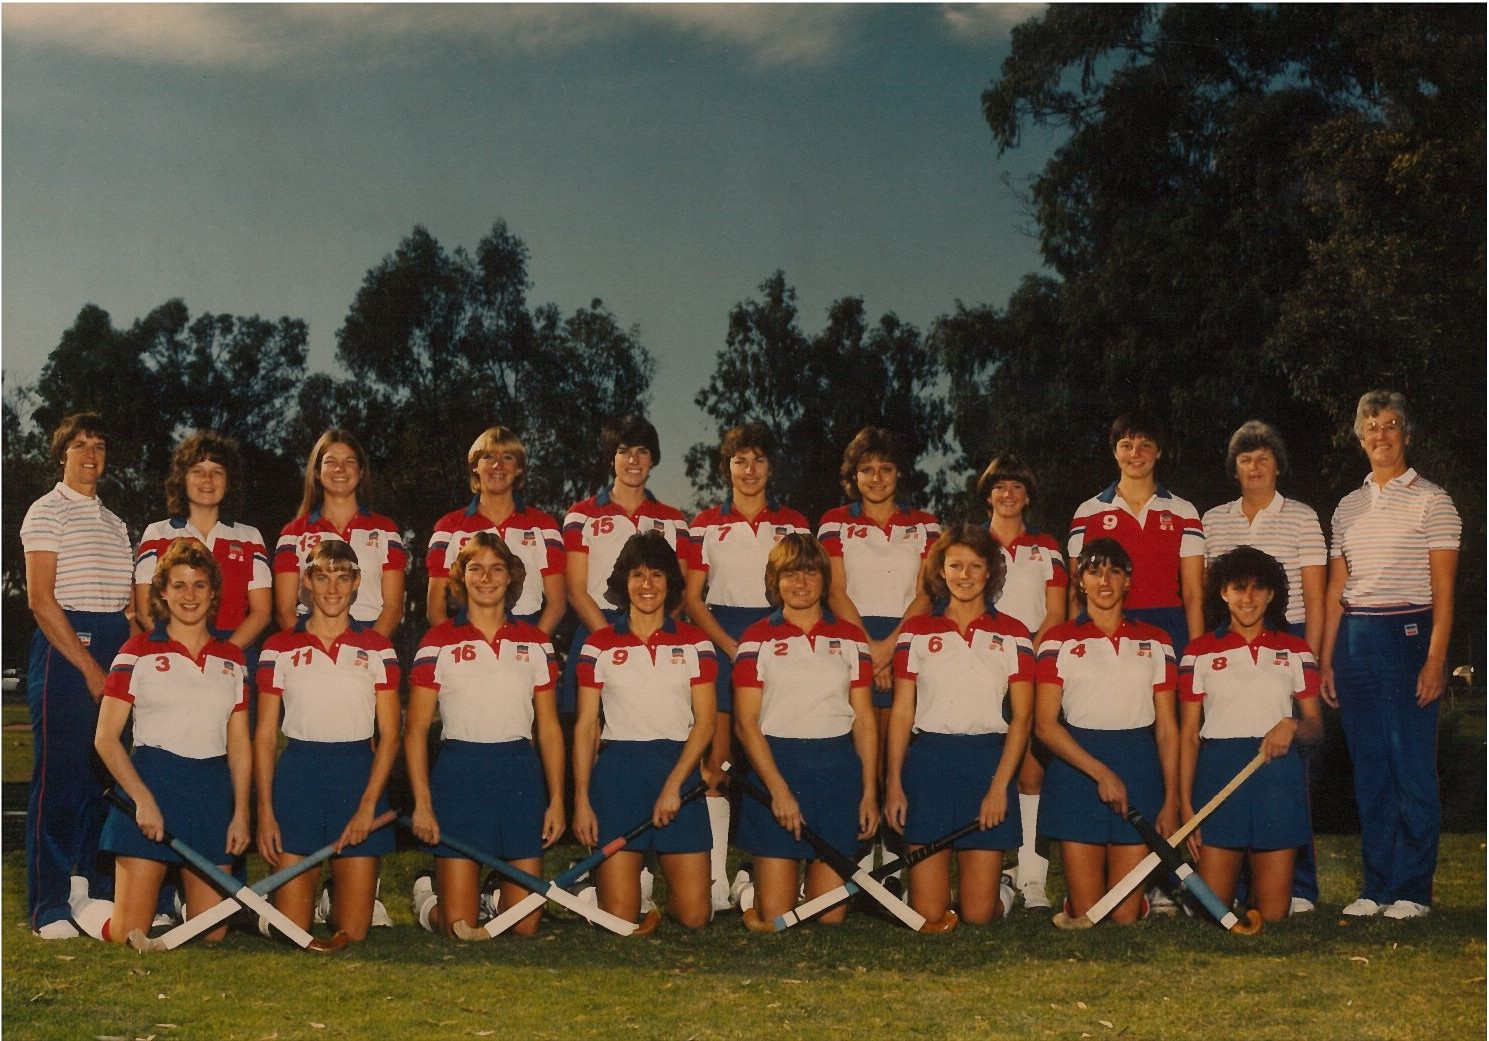 The United States have won two Olympic medals in hockey, both when Los Angeles staged the Games, including a bronze for the women's team in 1984 ©USA Field Hockey